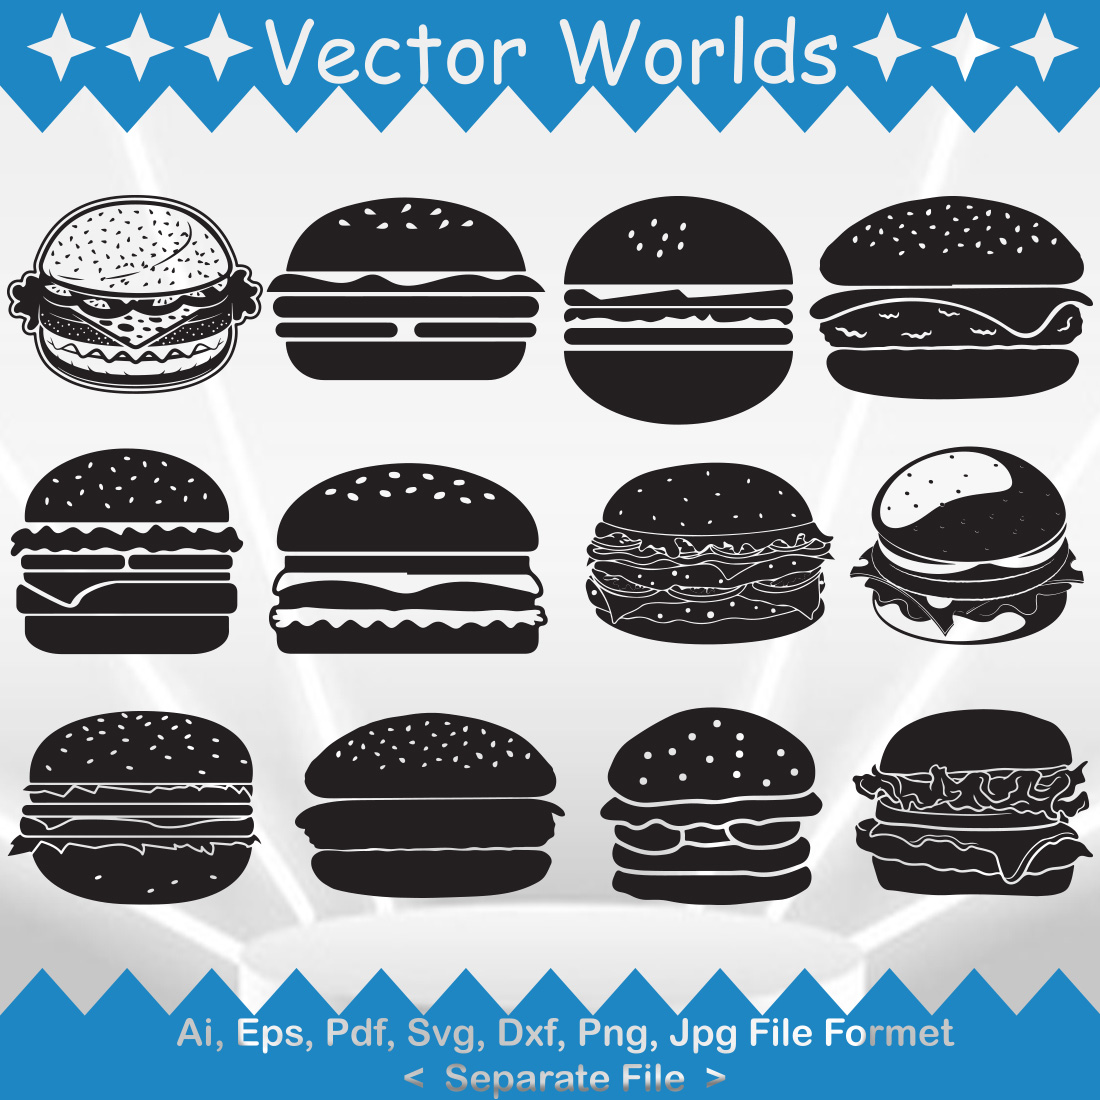 A selection of vector beautiful images of the silhouette of burgers.